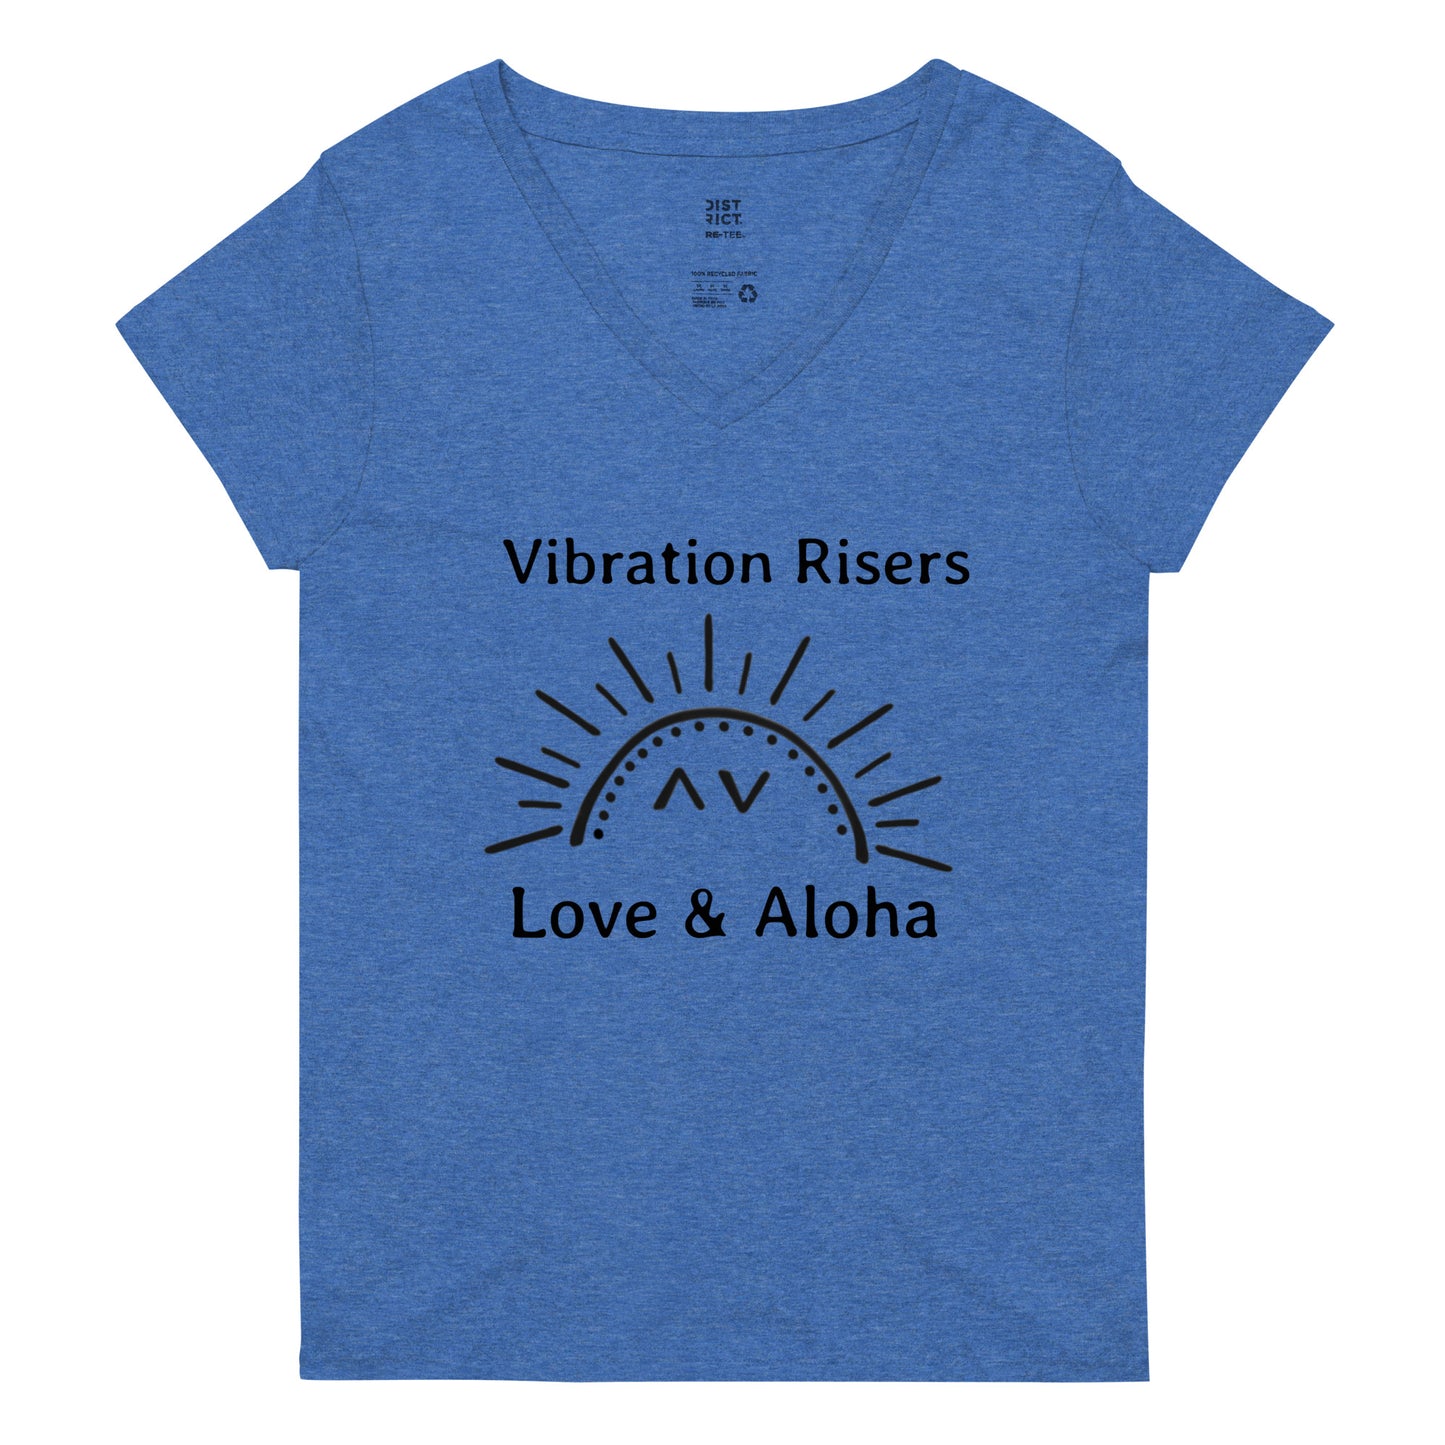 Vibration Risers Women’s Recycled V-neck